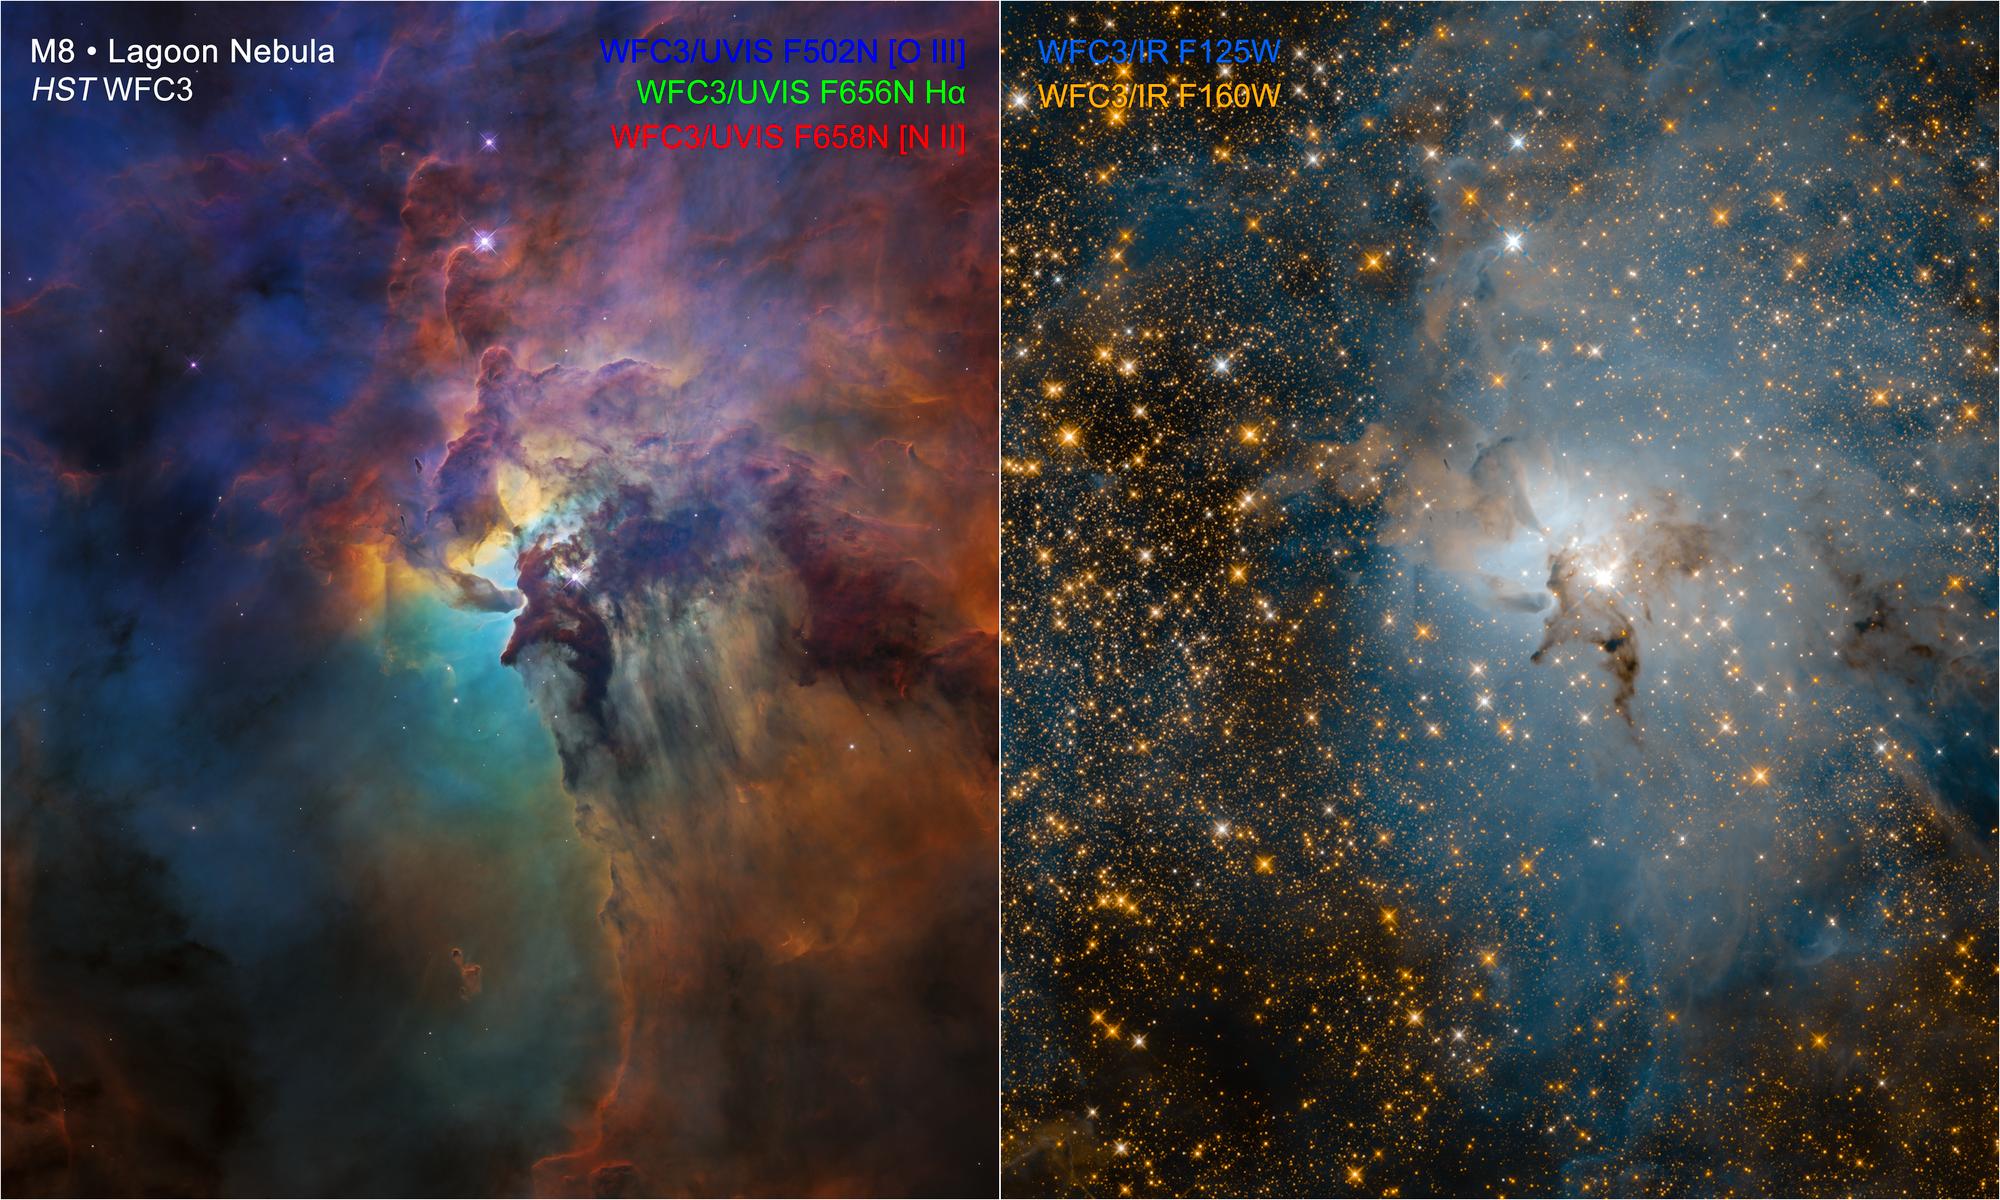 Hubble Releases Mind-Blowing New Images Of The Lagoon Nebula To Honour Its 28th Anniversary